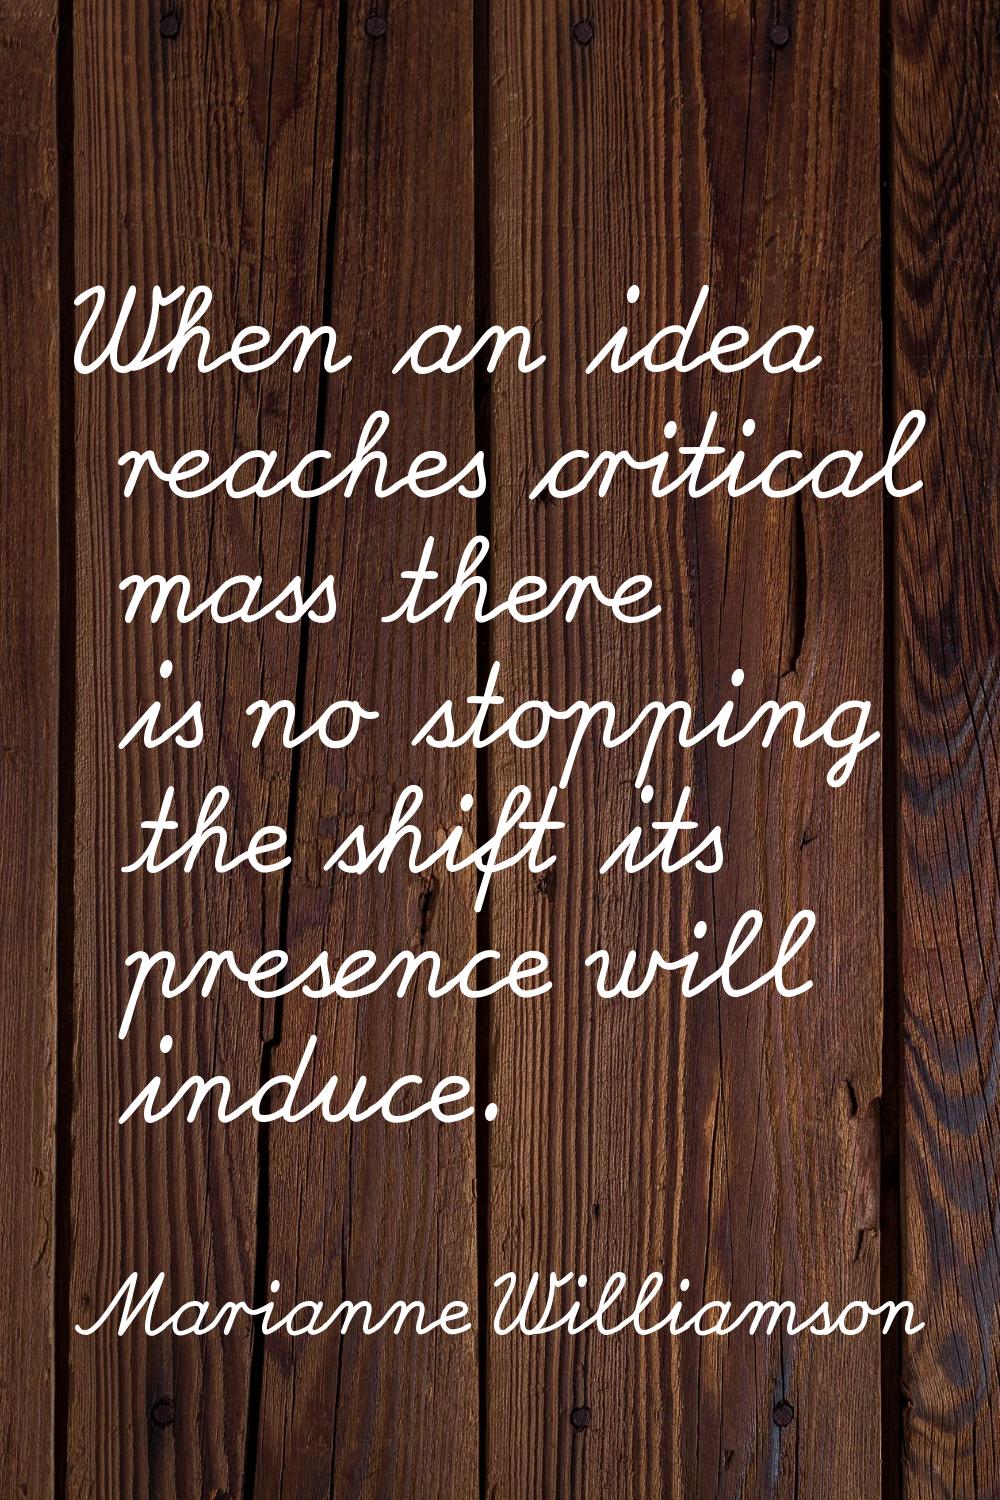 When an idea reaches critical mass there is no stopping the shift its presence will induce.